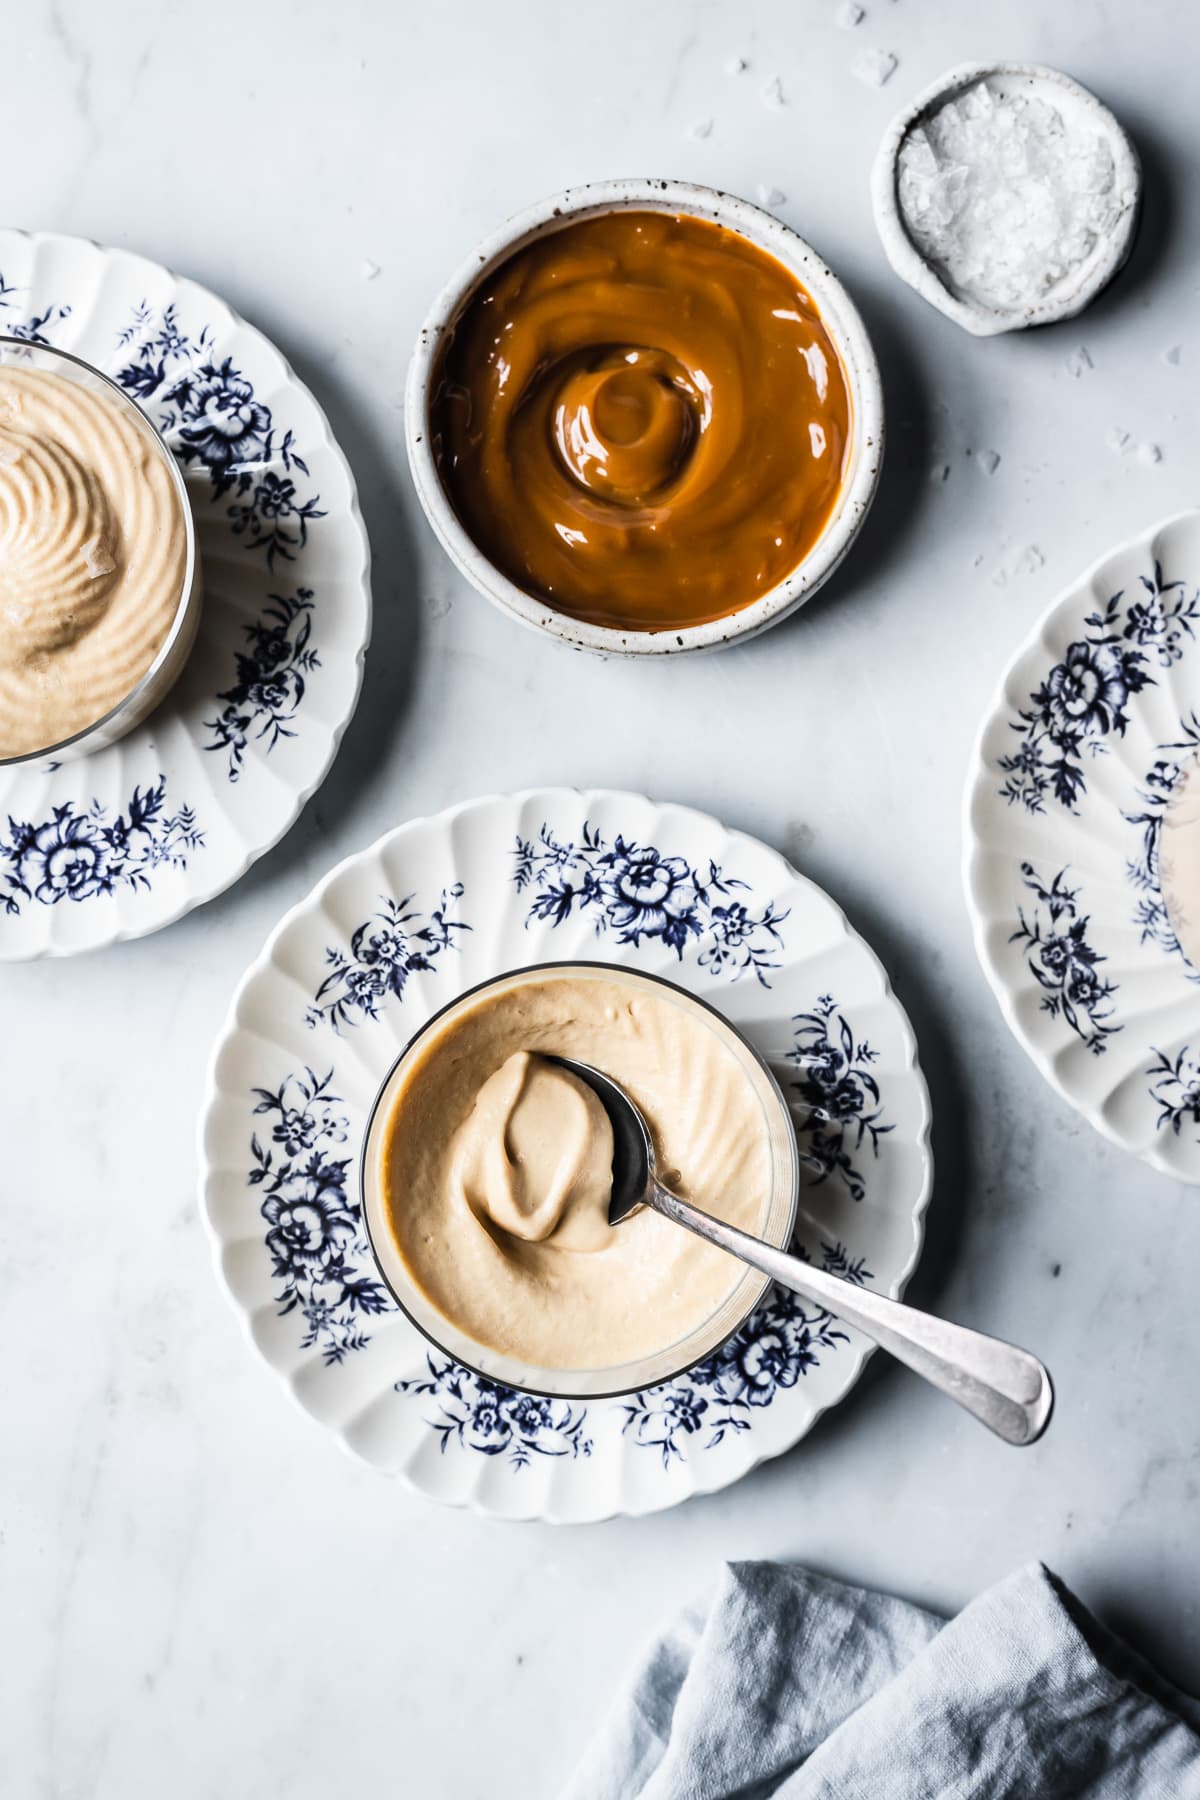 Three thin glass cups hold circular swirls of piped dulce de leche mousse. The cups sit on small scalloped blue and white floral plates on a grey marble background. Nearby are small bowls of dulce de leche and flaky sea salt. A light blue linen napkin rests at bottom right.